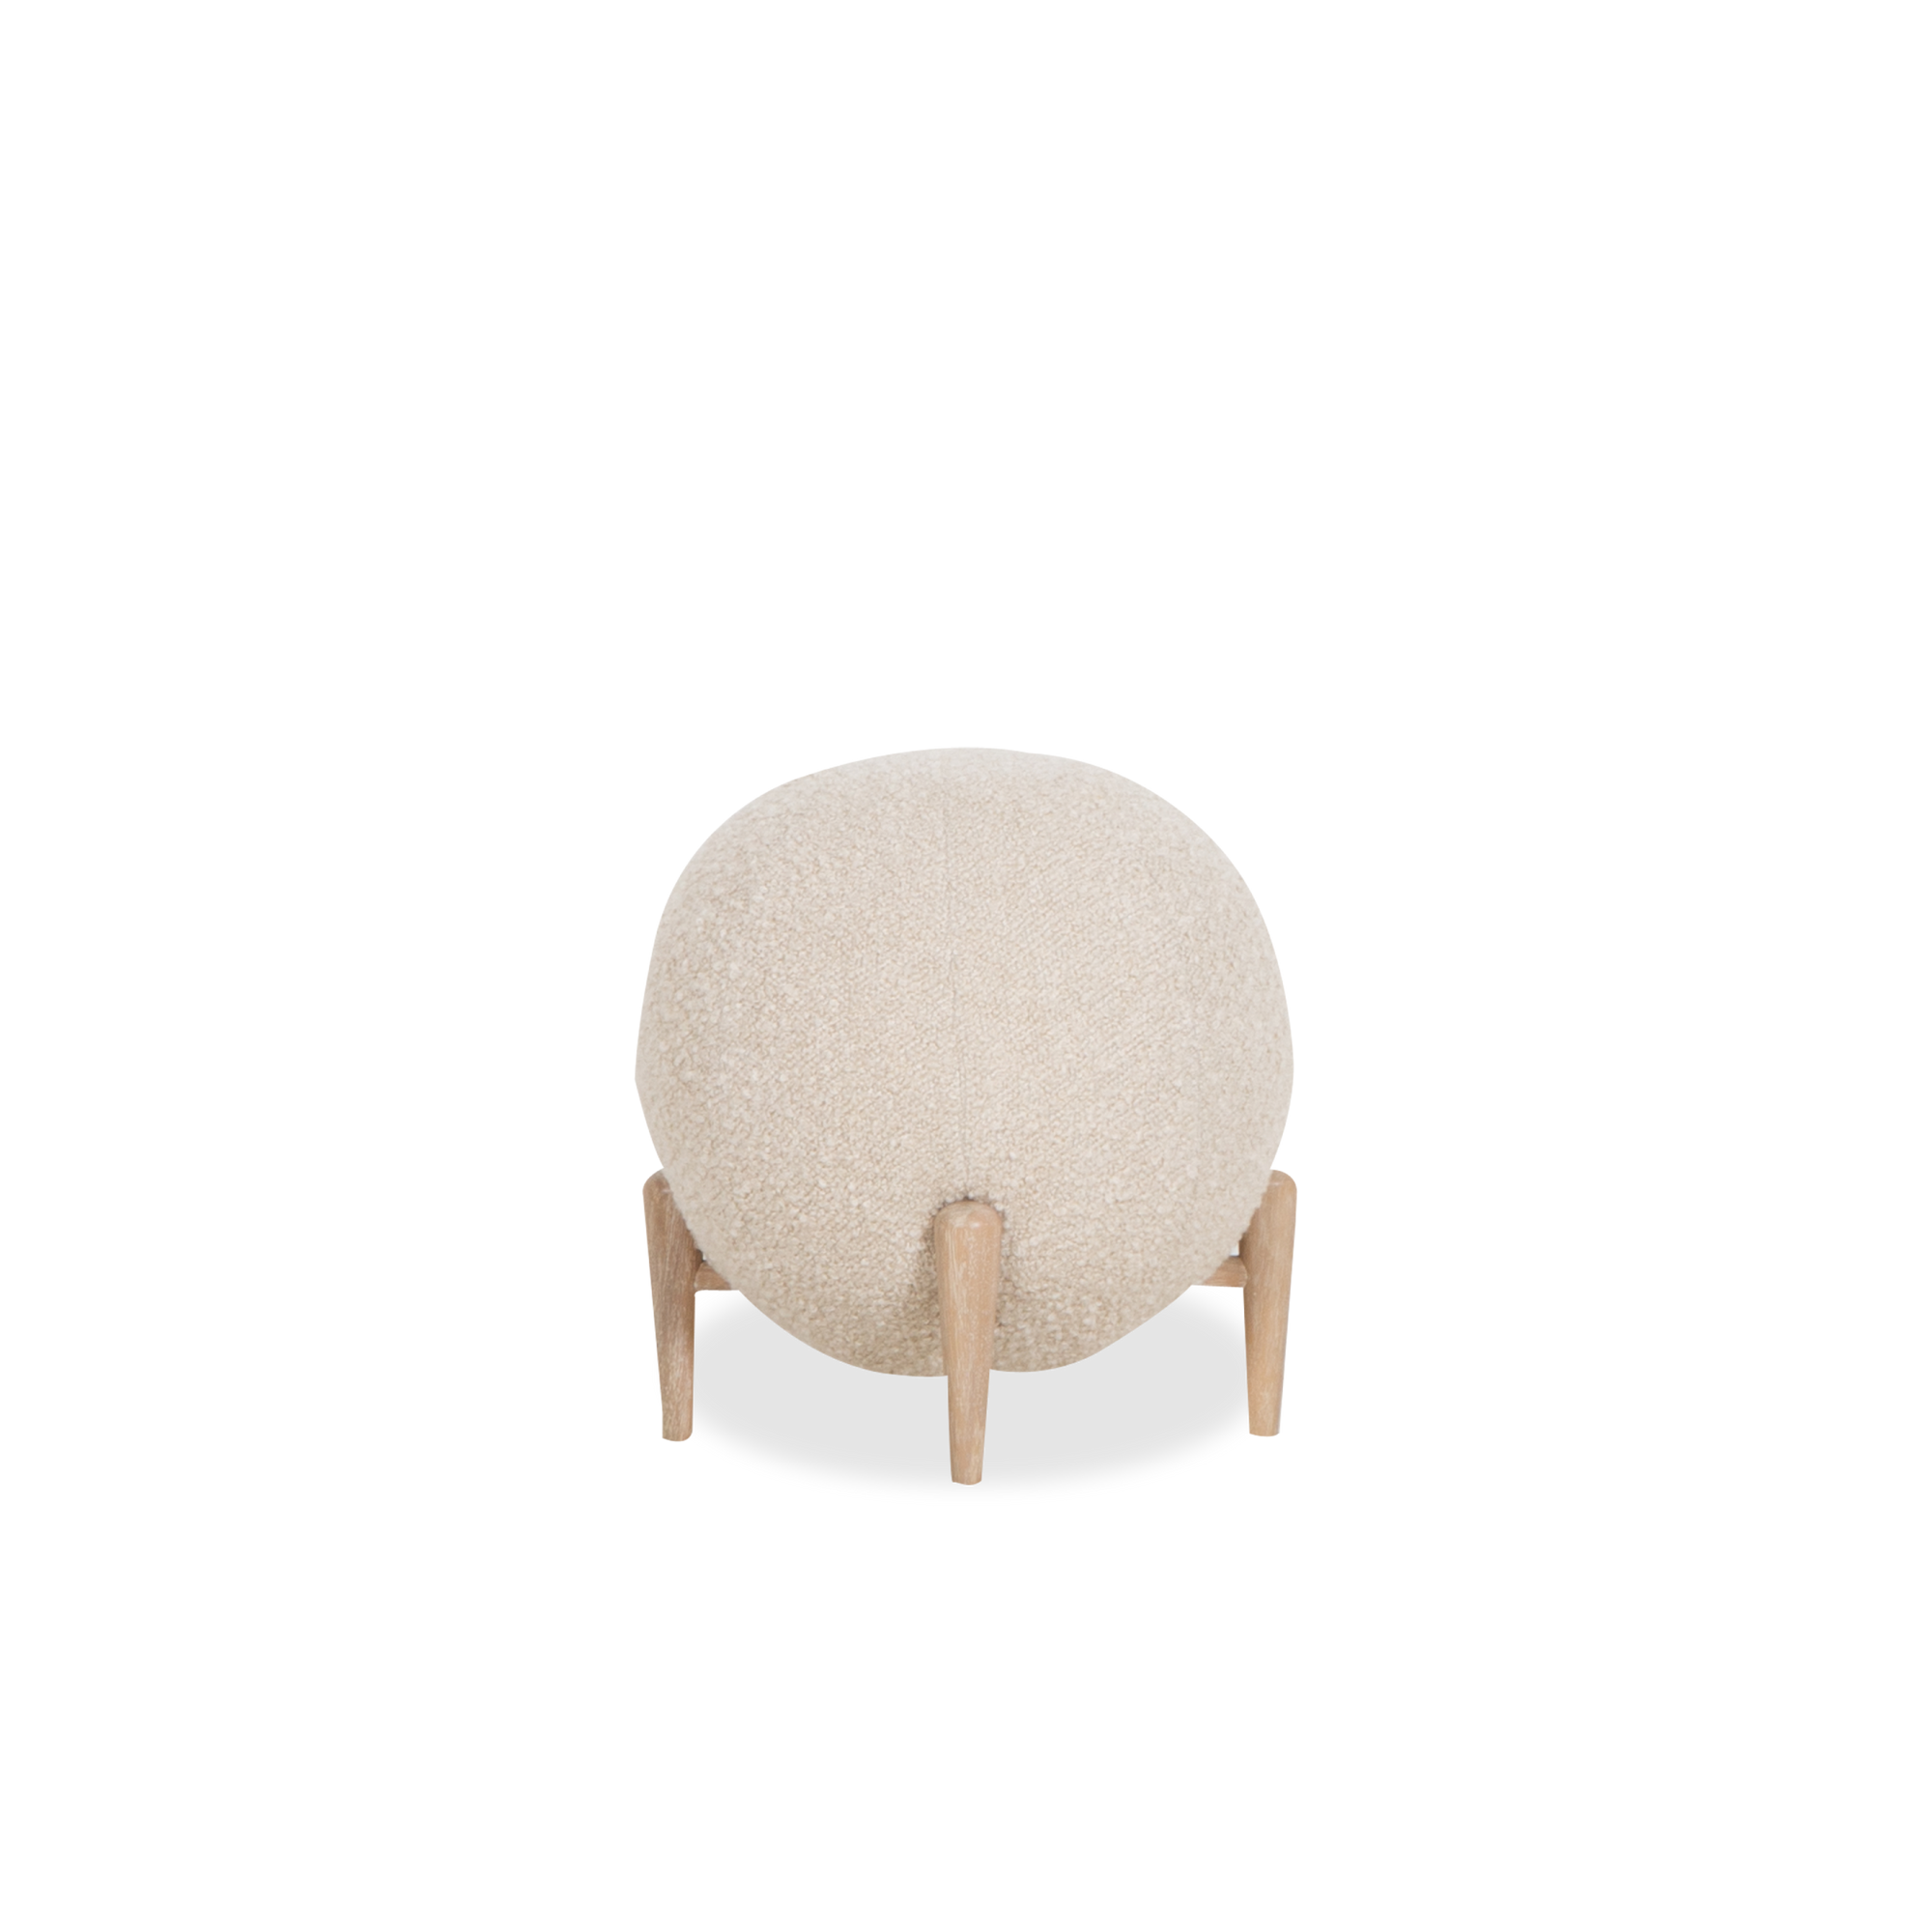 A standout piece, the Shearling Ball Stool is a sculptural and functional accent piece for any space.